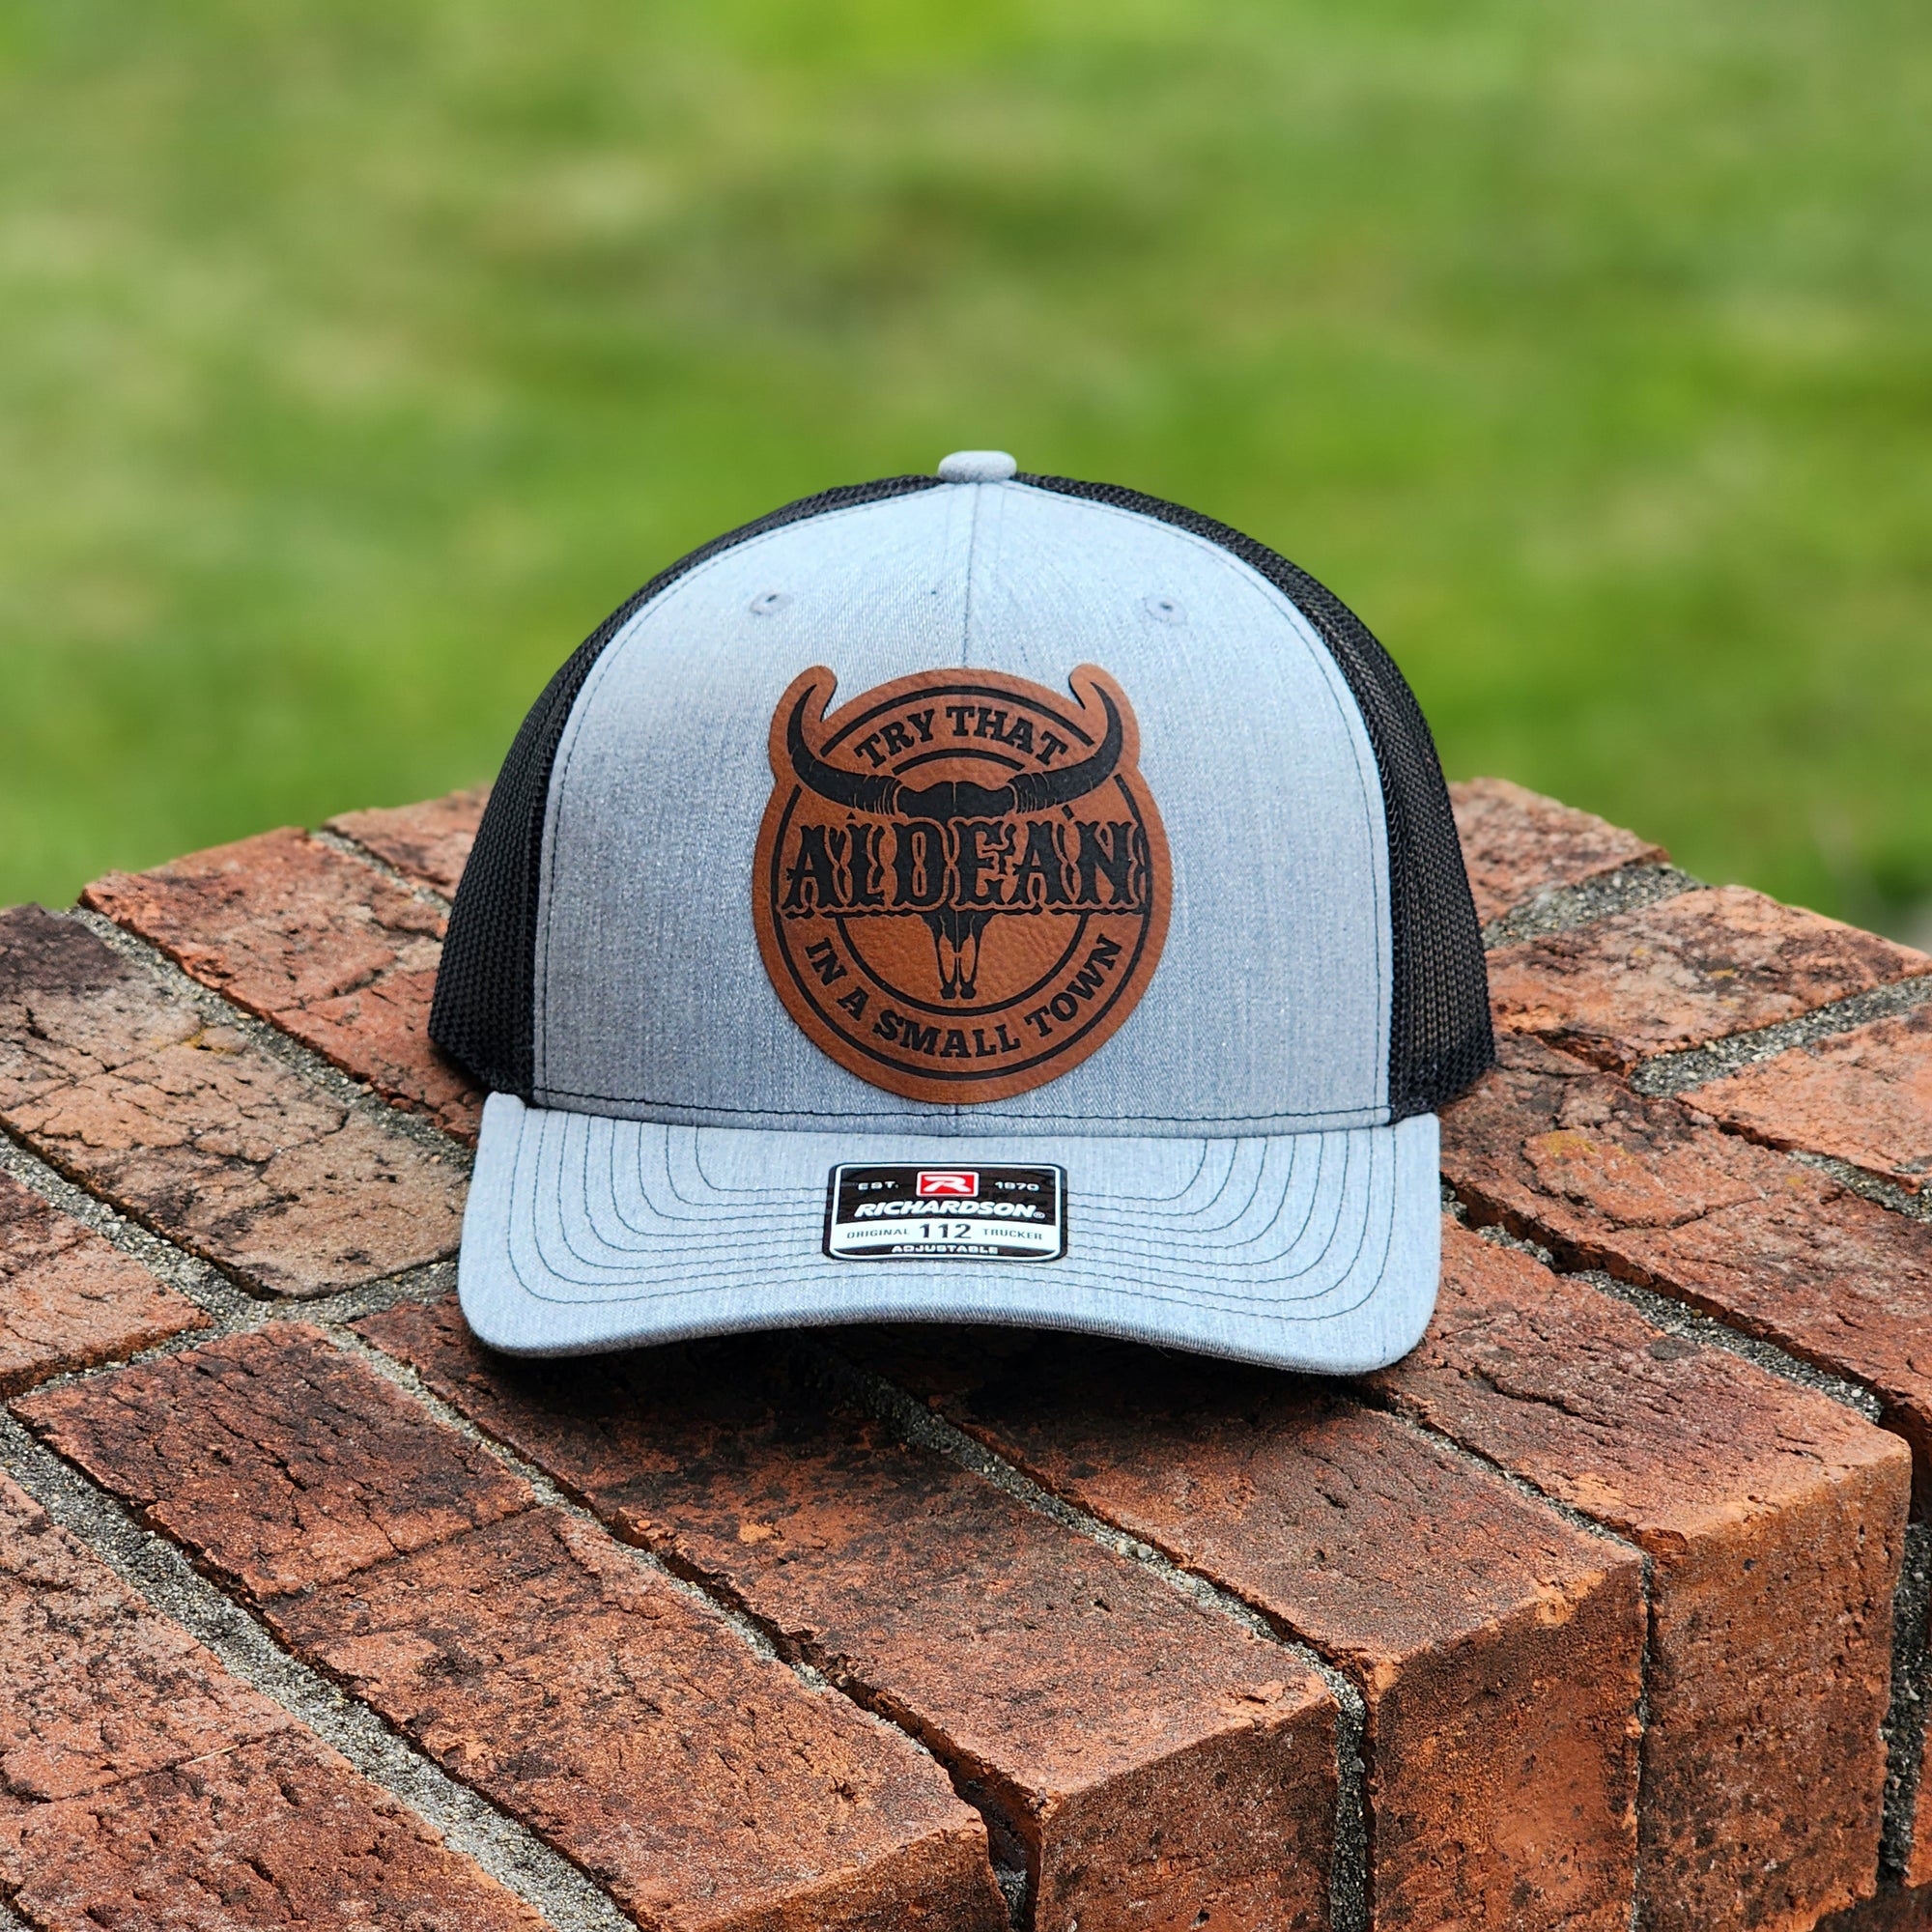 Try That In A Small Town Circular Patch - Heather Grey and Black Richardson 112 Trucker Hat